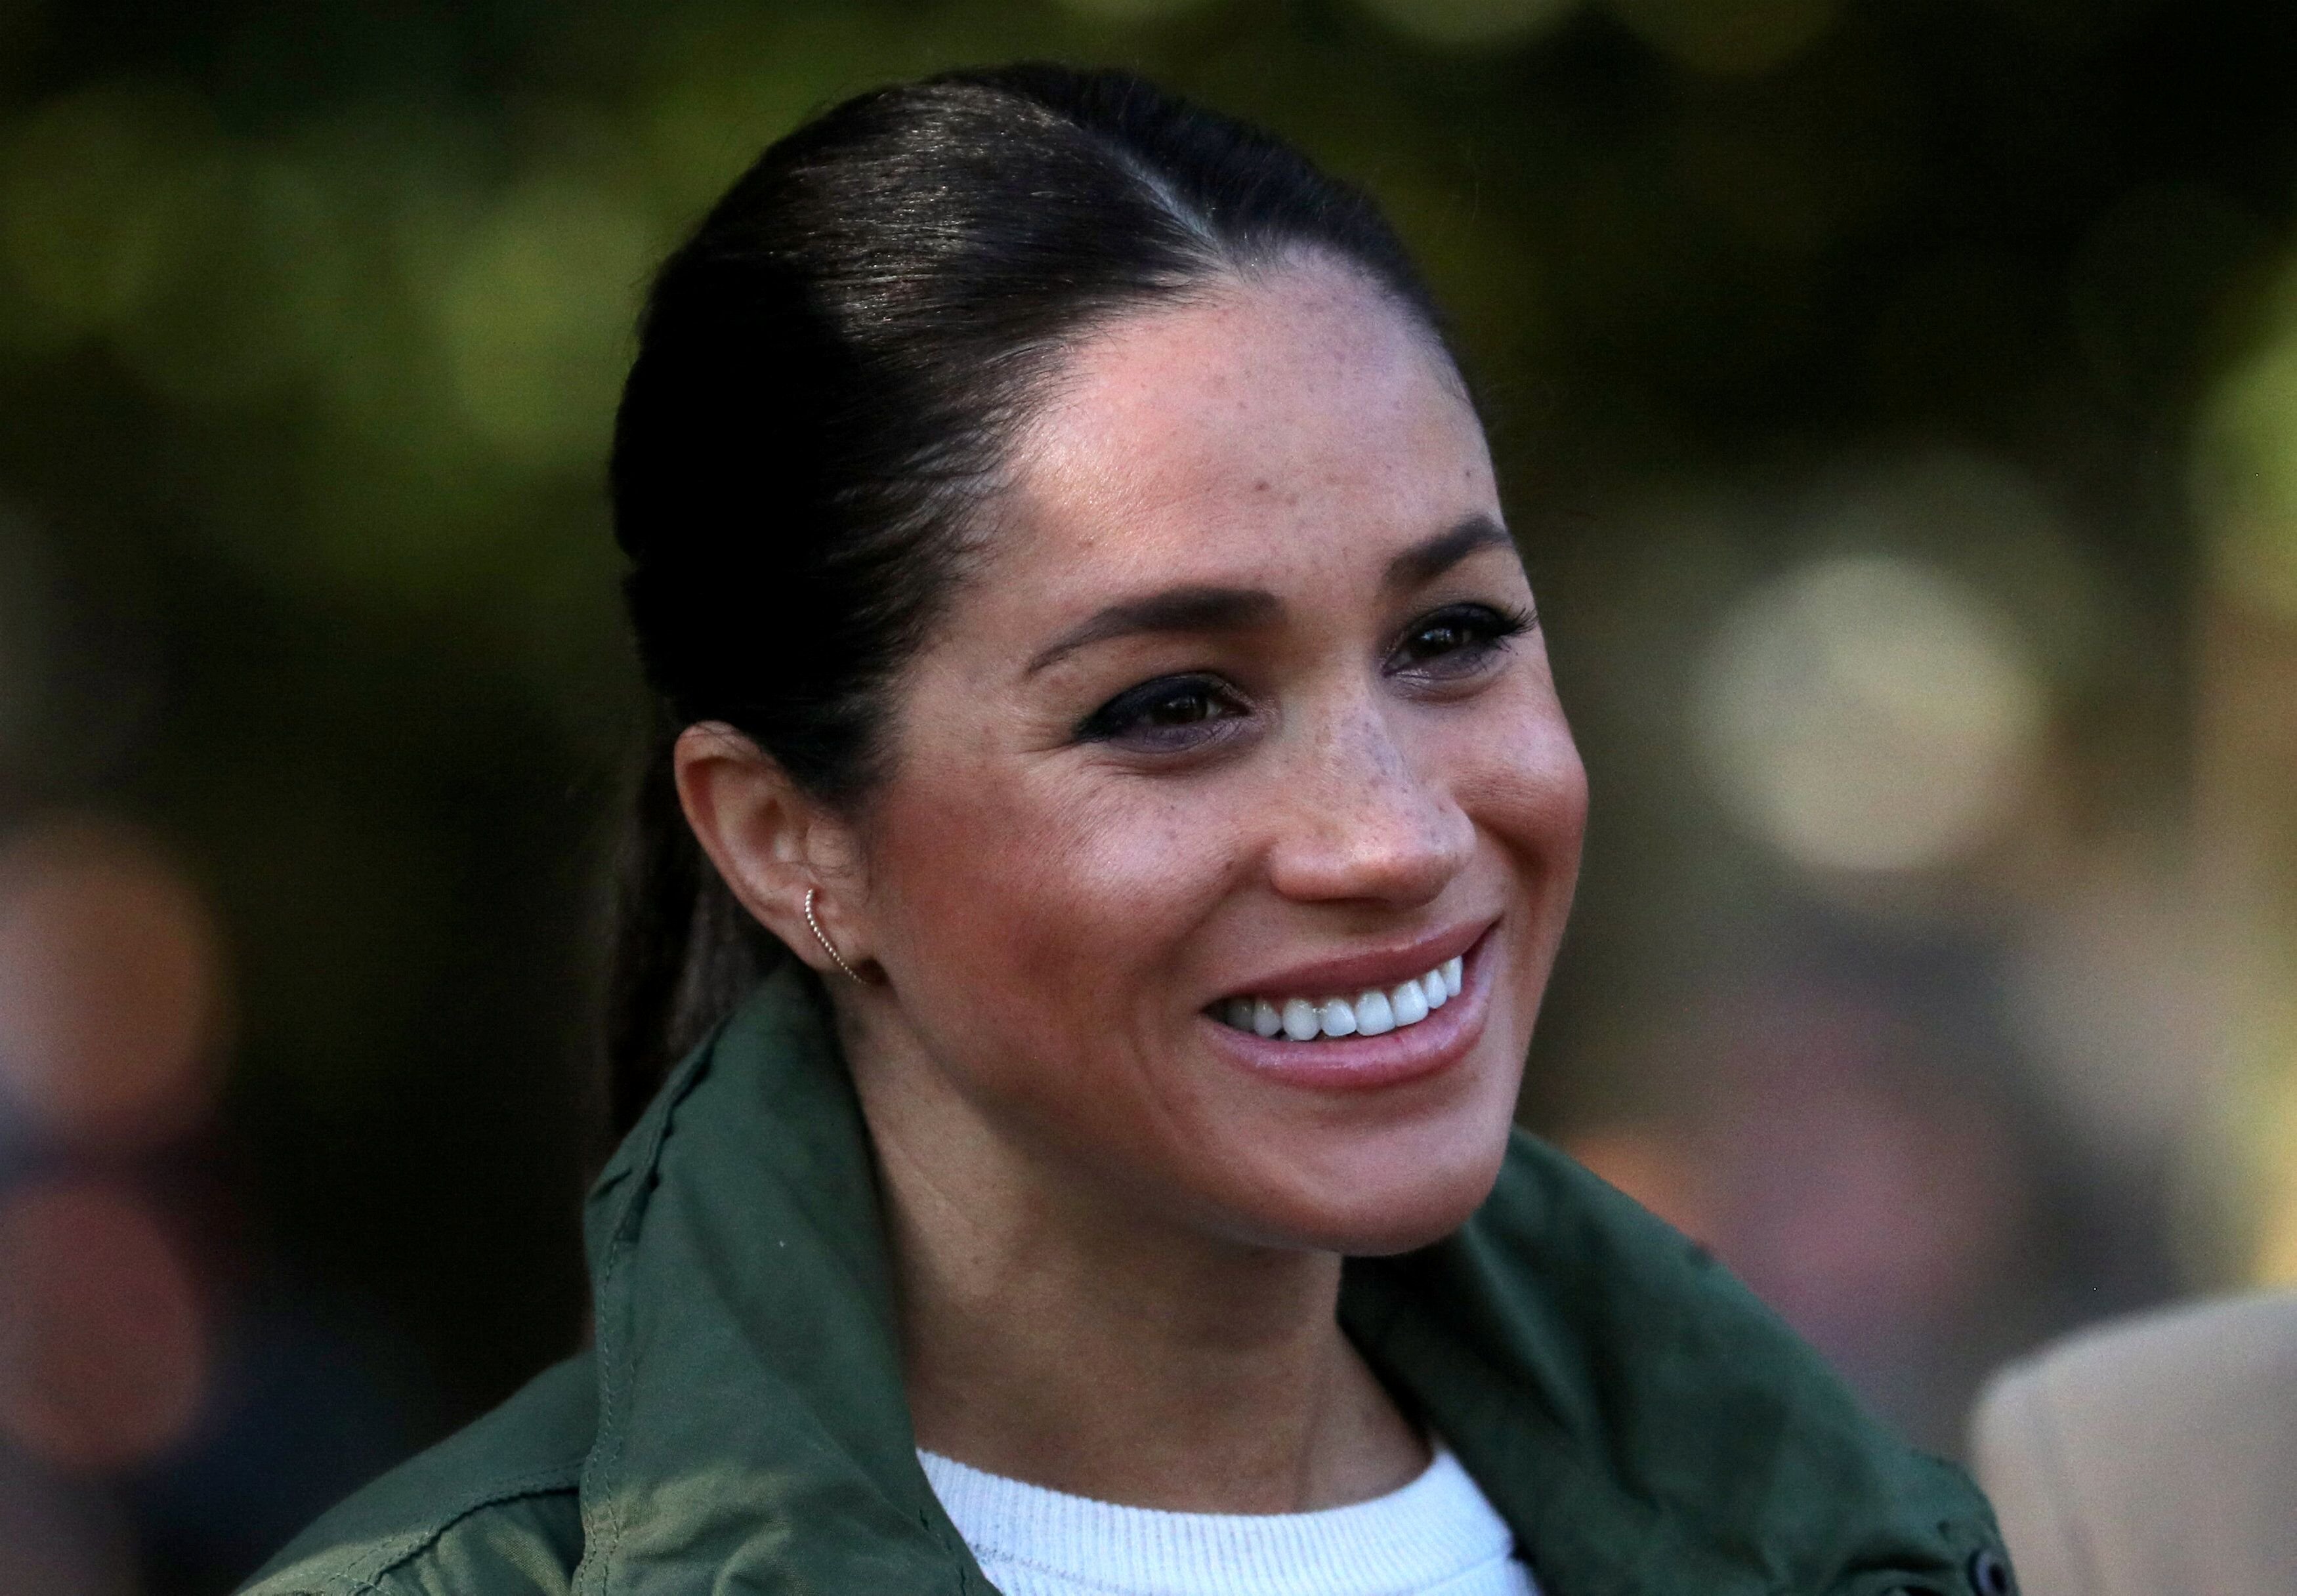 The Duchess of Sussex/ Source: Getty Images